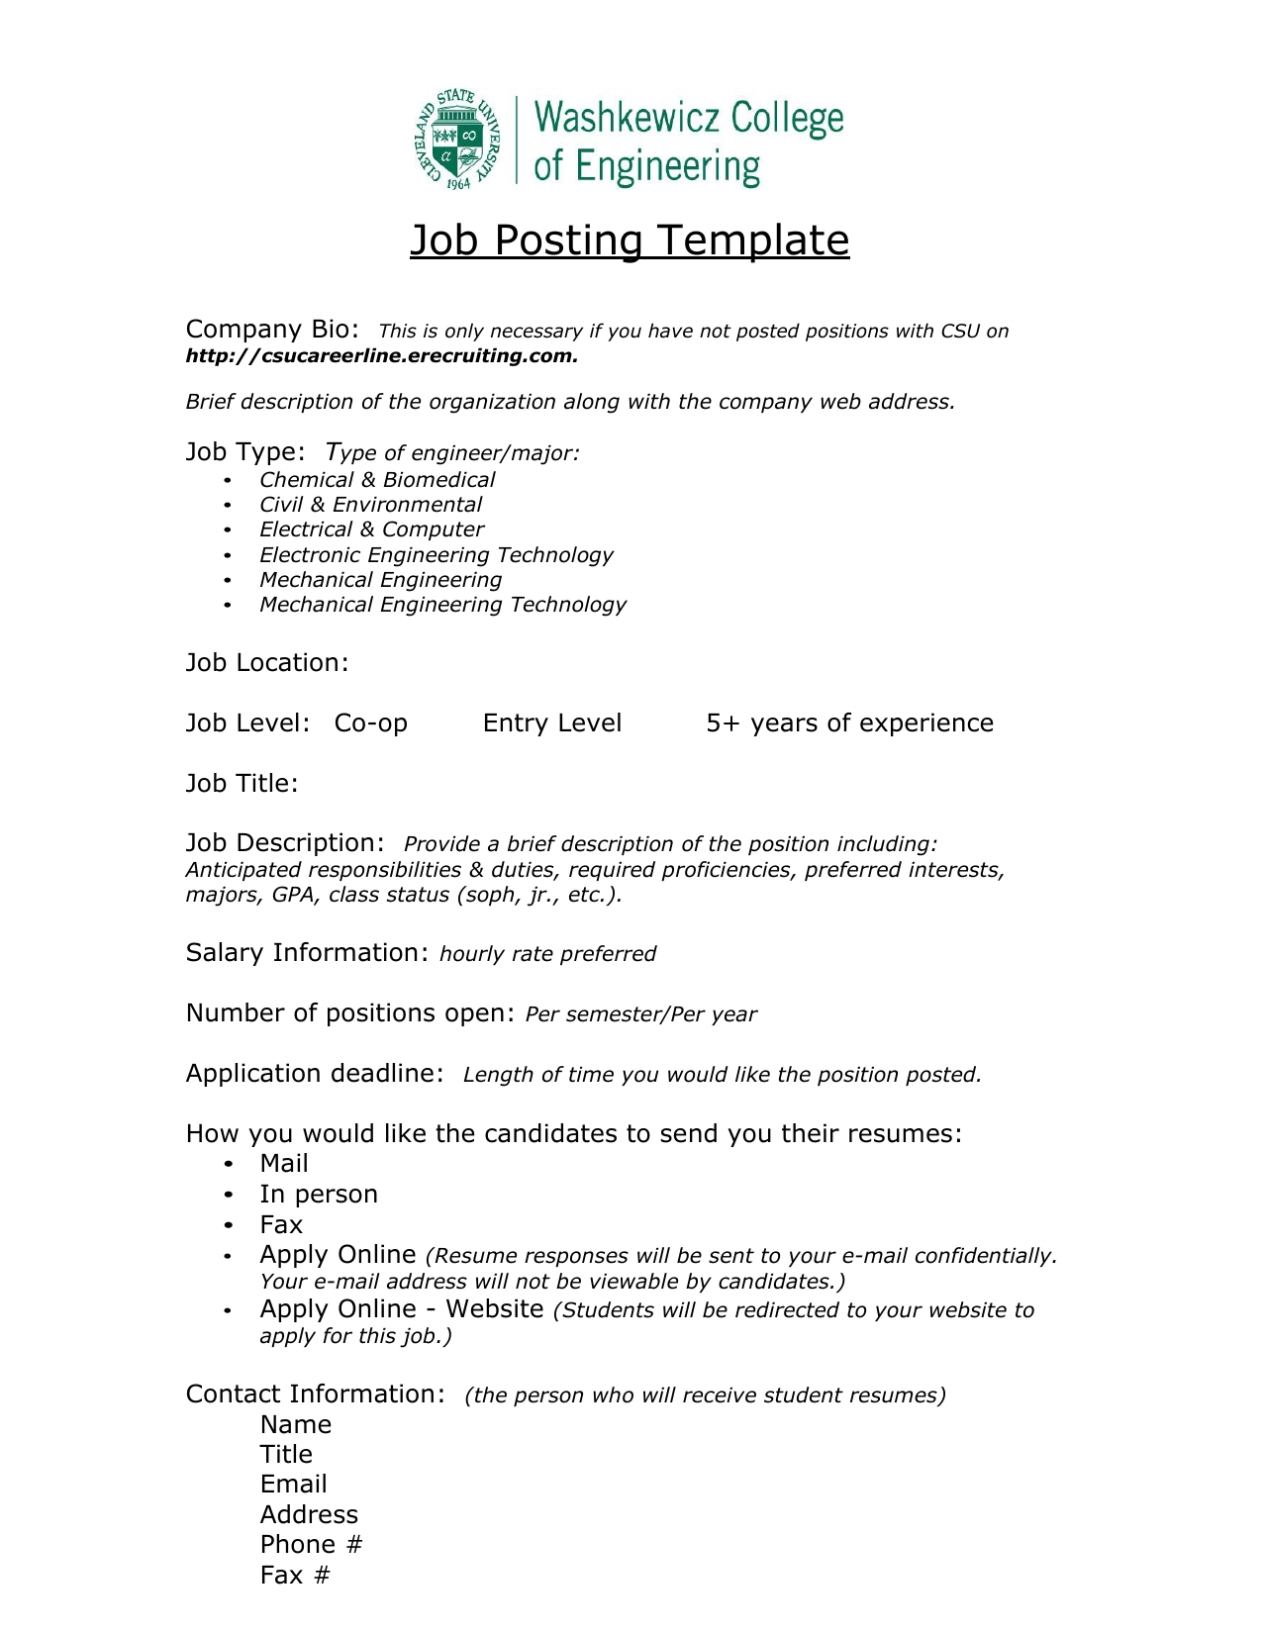 Job Ad Template : 10 Examples Of The Best Job Ads In 2018 | Ongig Blog Within Job Posting Flyer Template